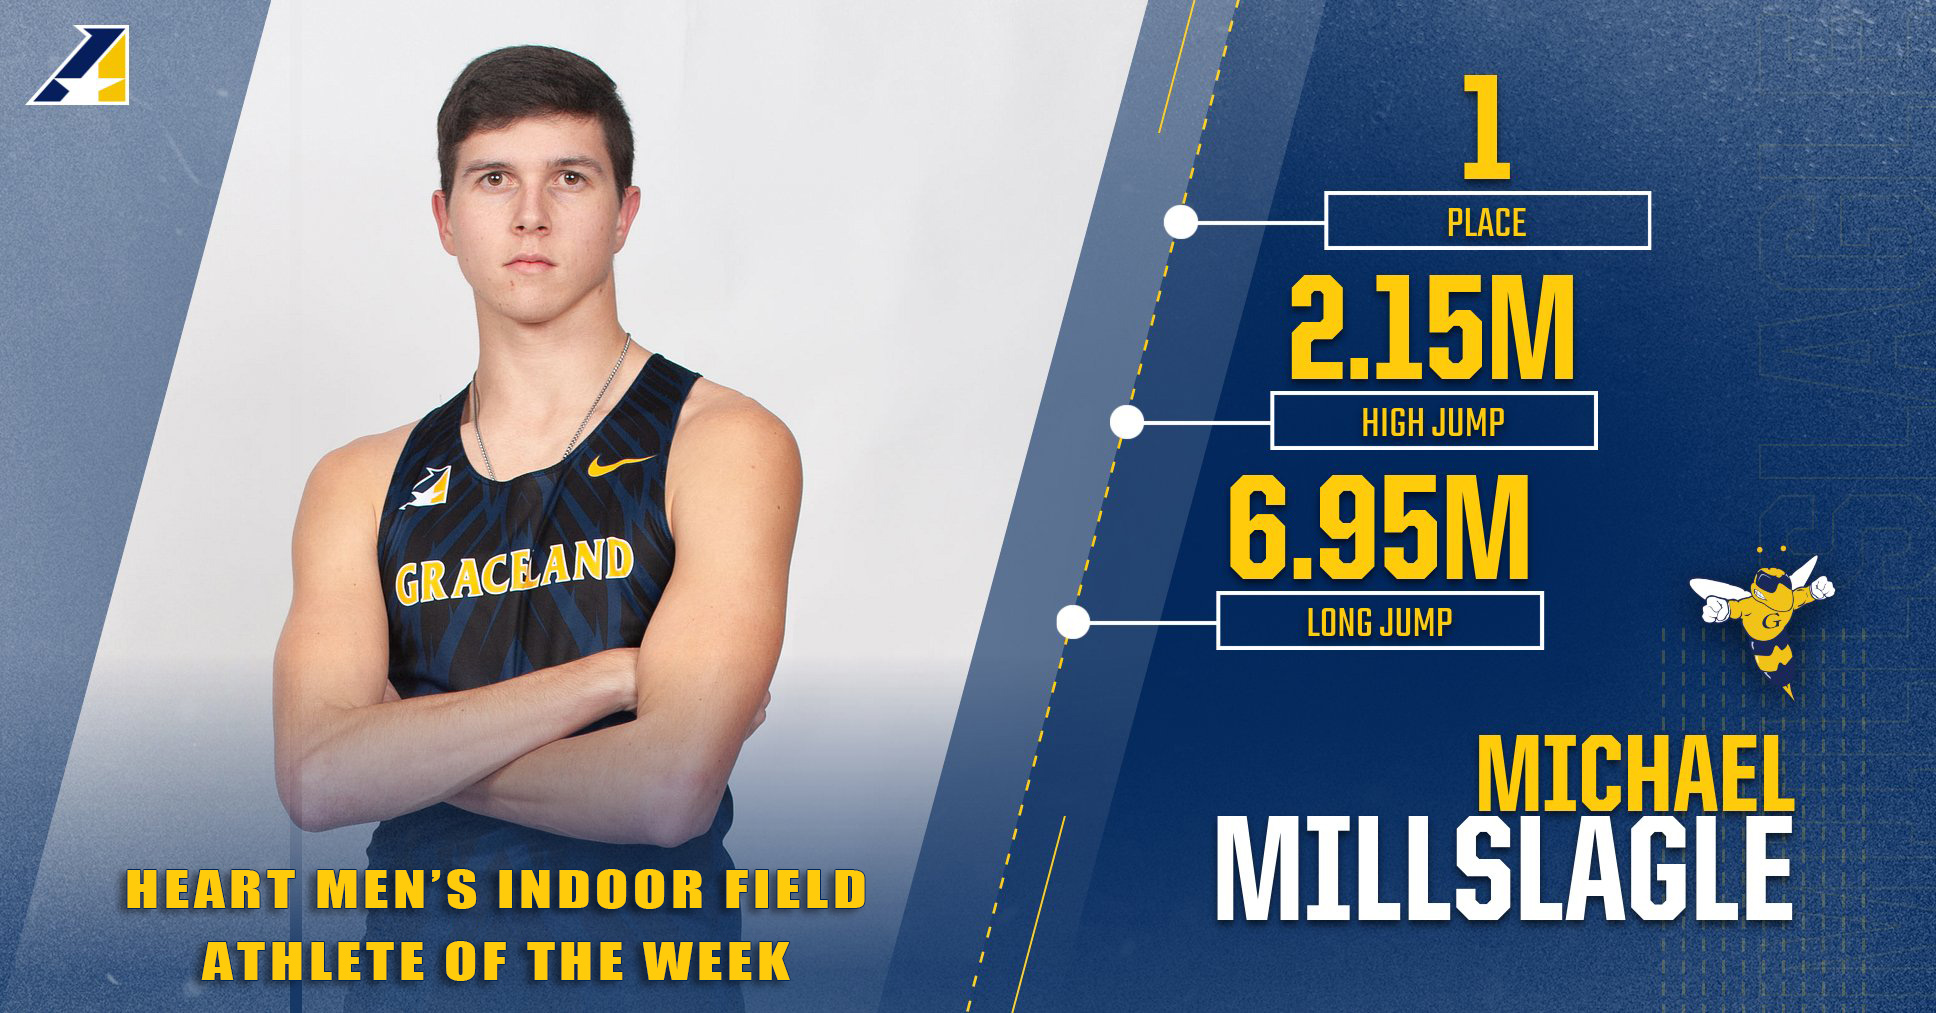 Millslagle Named Heart Men's Indoor Field Athlete of the Week for Second Consecutive Week